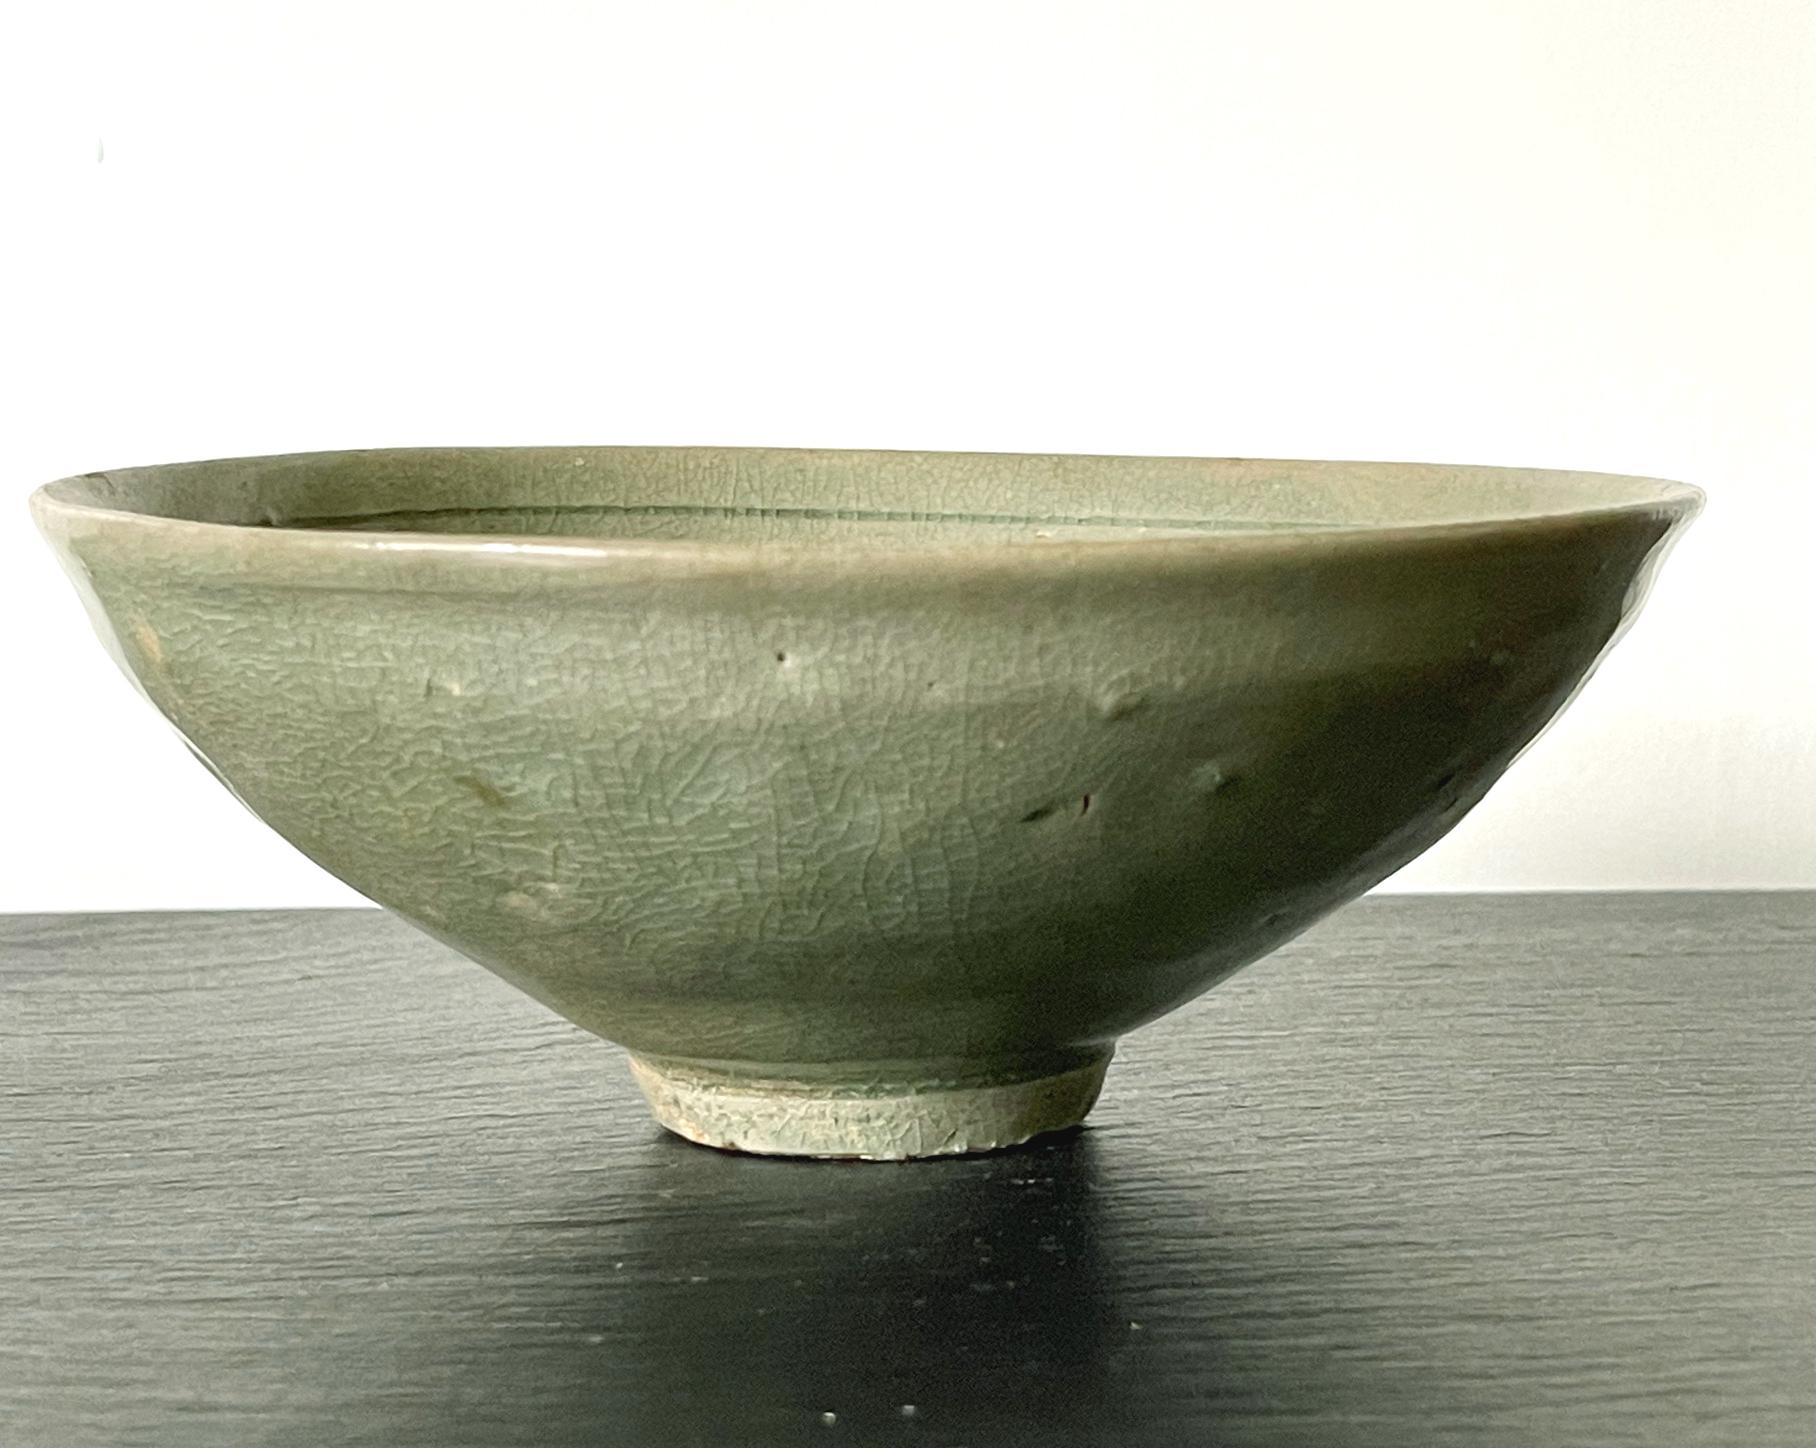 A Korean stoneware bowl from Goryeo dynasty circa 12th century. The conical form bowl with a small raised foot rim is covered in a celadon green glaze. Under the glaze, the interior is decorated with carved design of a floral pattern with scrolling